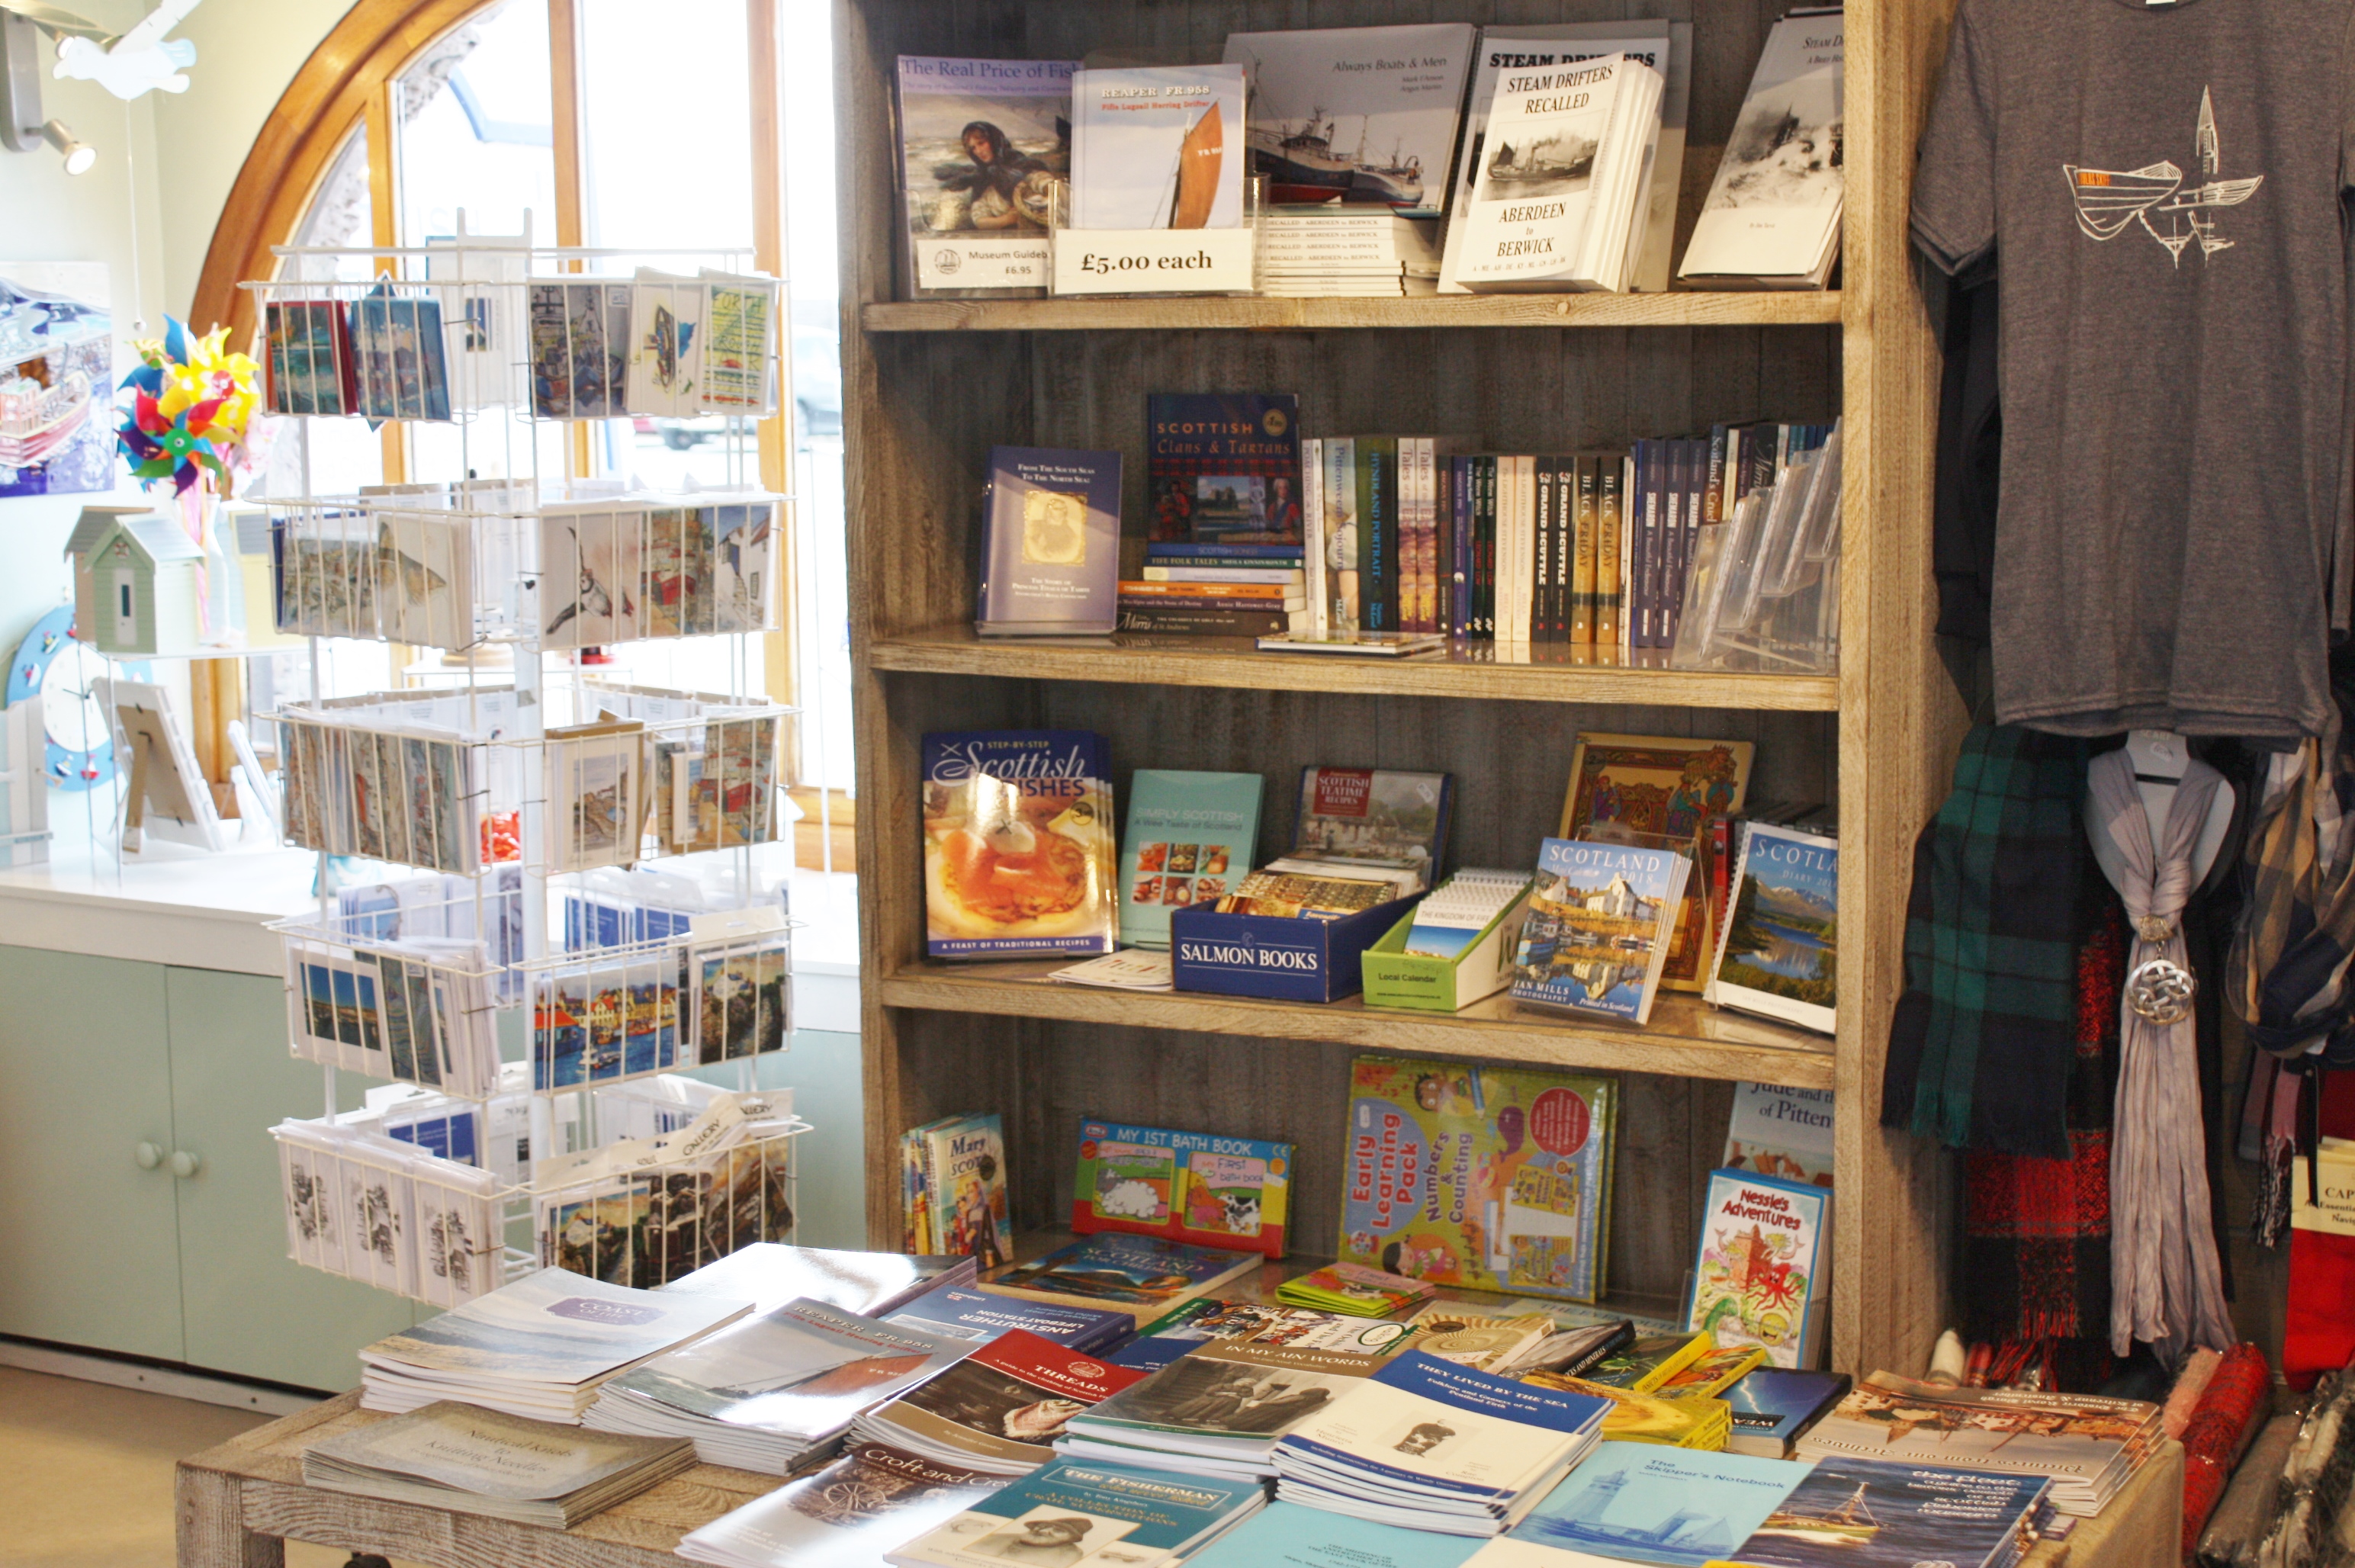 The book section of the Museum Shop